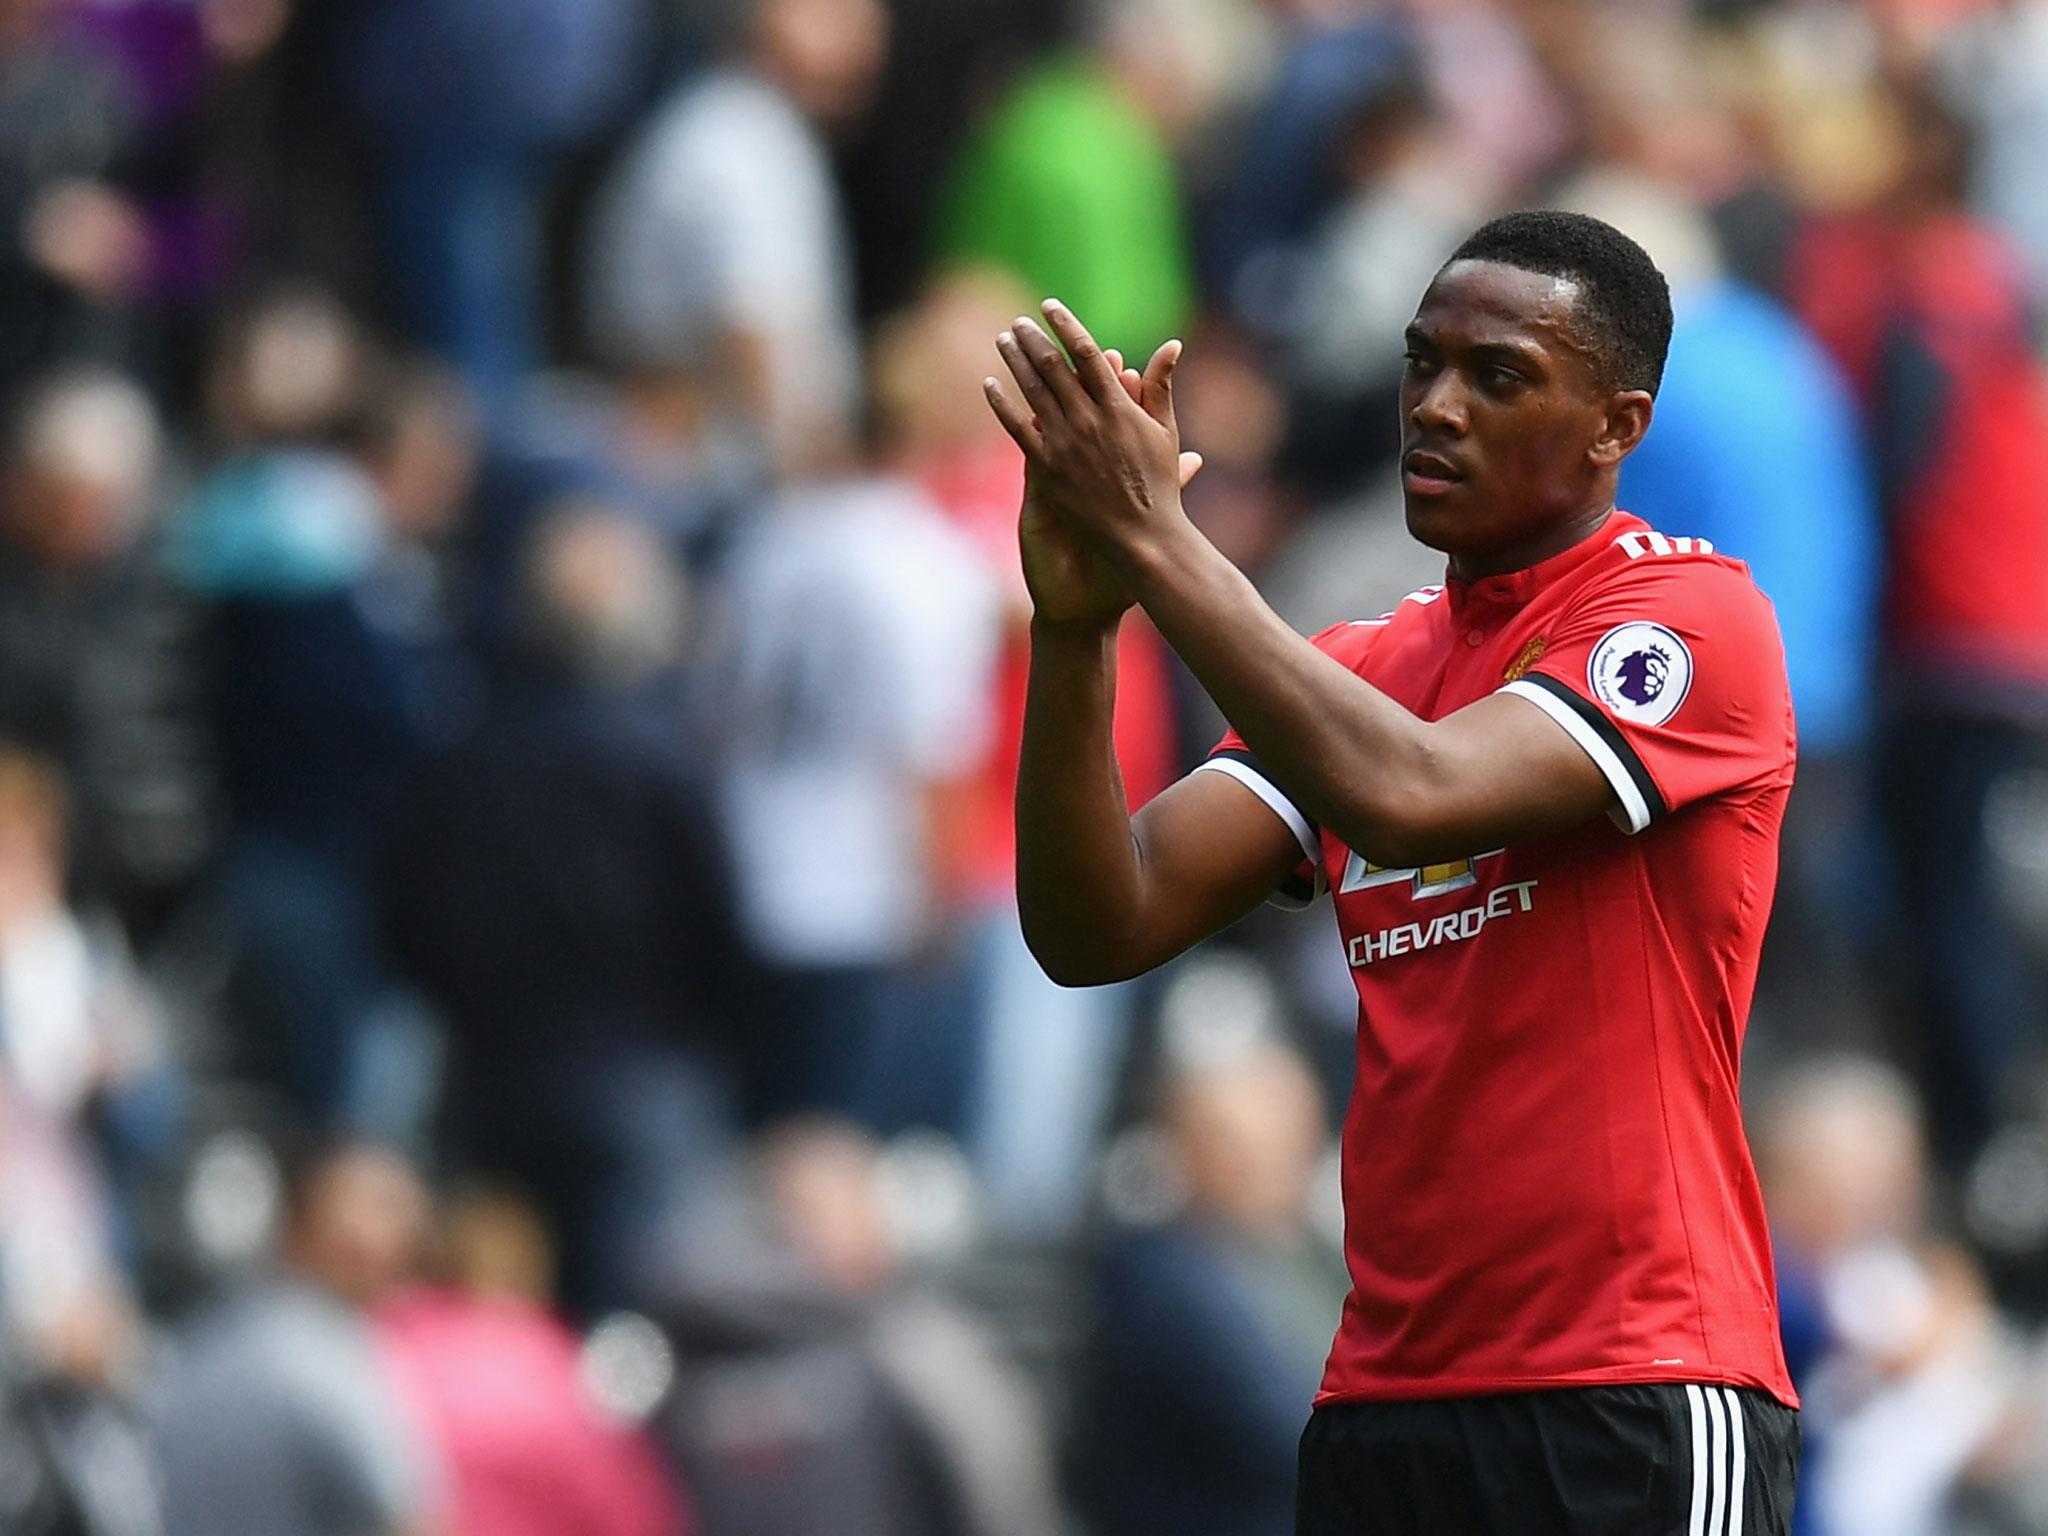 Anthony Martial grabbed his second goal of the season against Swansea on Saturday